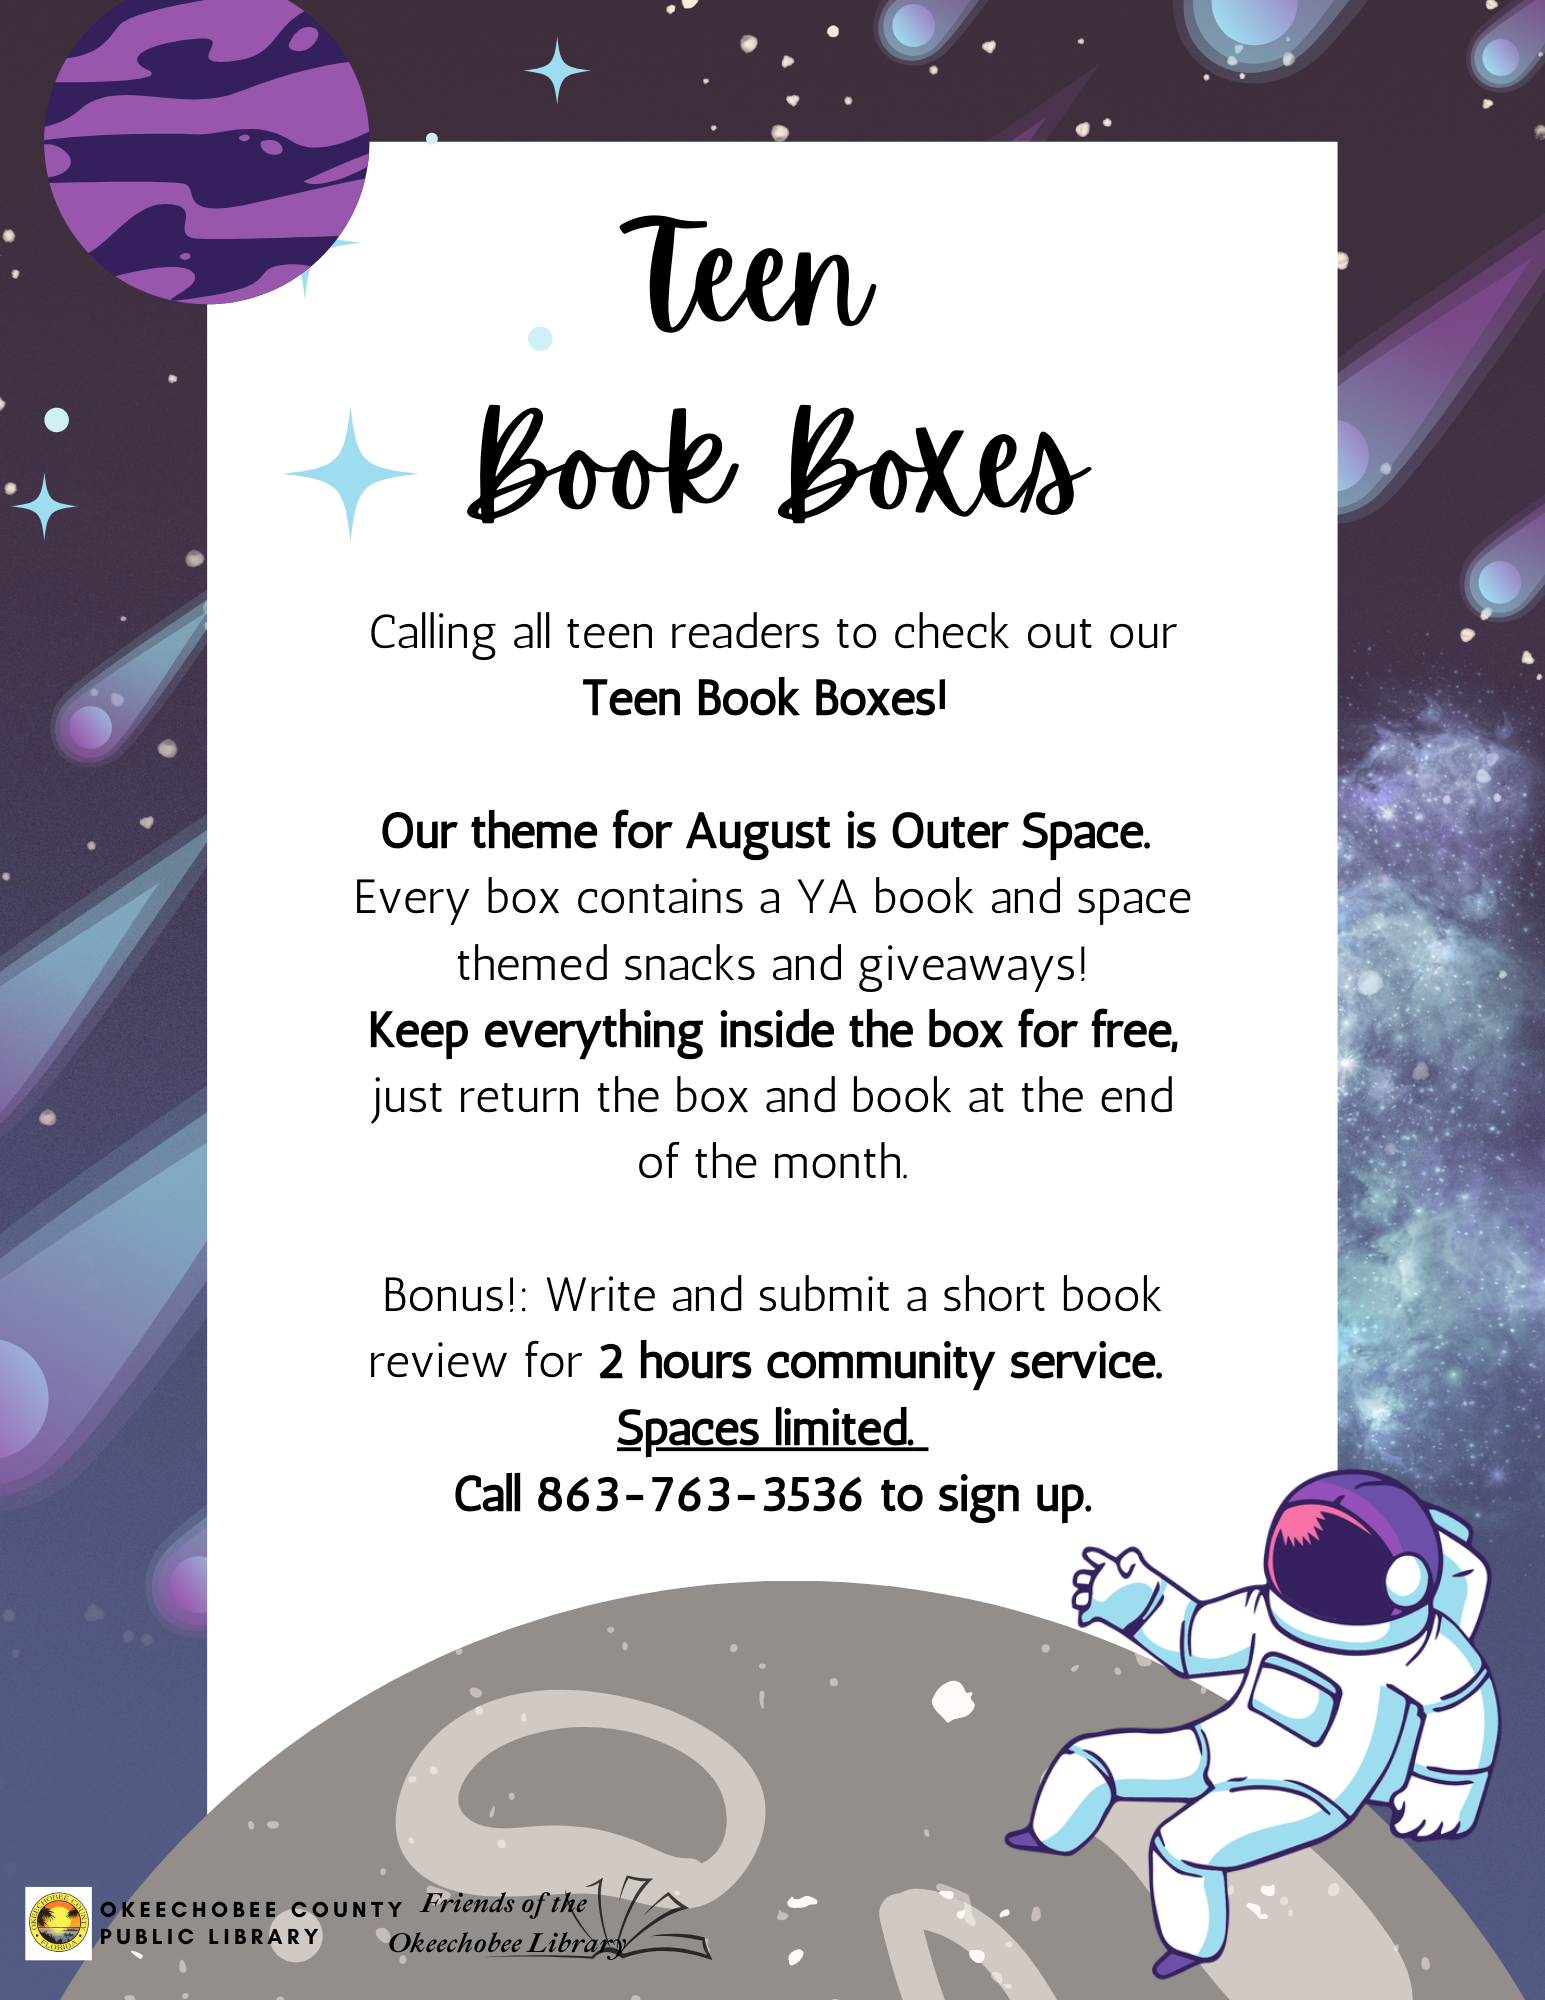 "Don't forget to sign up for the August Teen Book Boxes! Open to all teens, get free prizes and snacks just for checking out a book! Bonus: Write a short summary/review of the book and turn it in to get up to 2 hours of community service! SPACES LIMITED. To sign up, call 863-763-3536!"